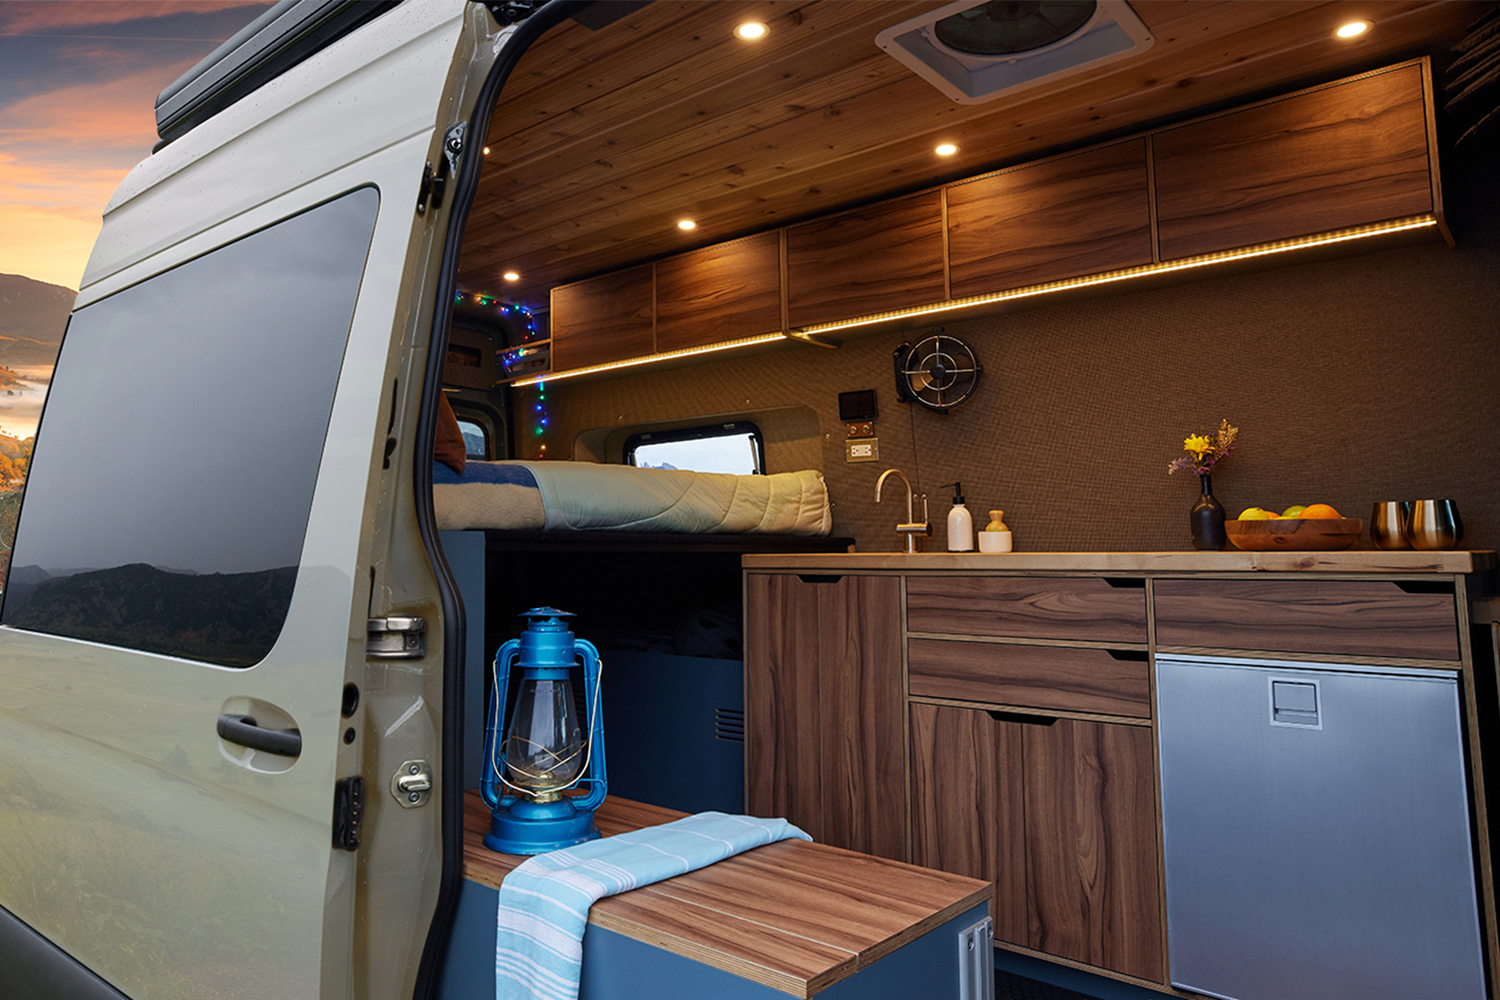 The door open on a camper van being given away by Omaze, with a view to the homey interior with a bed and kitchen